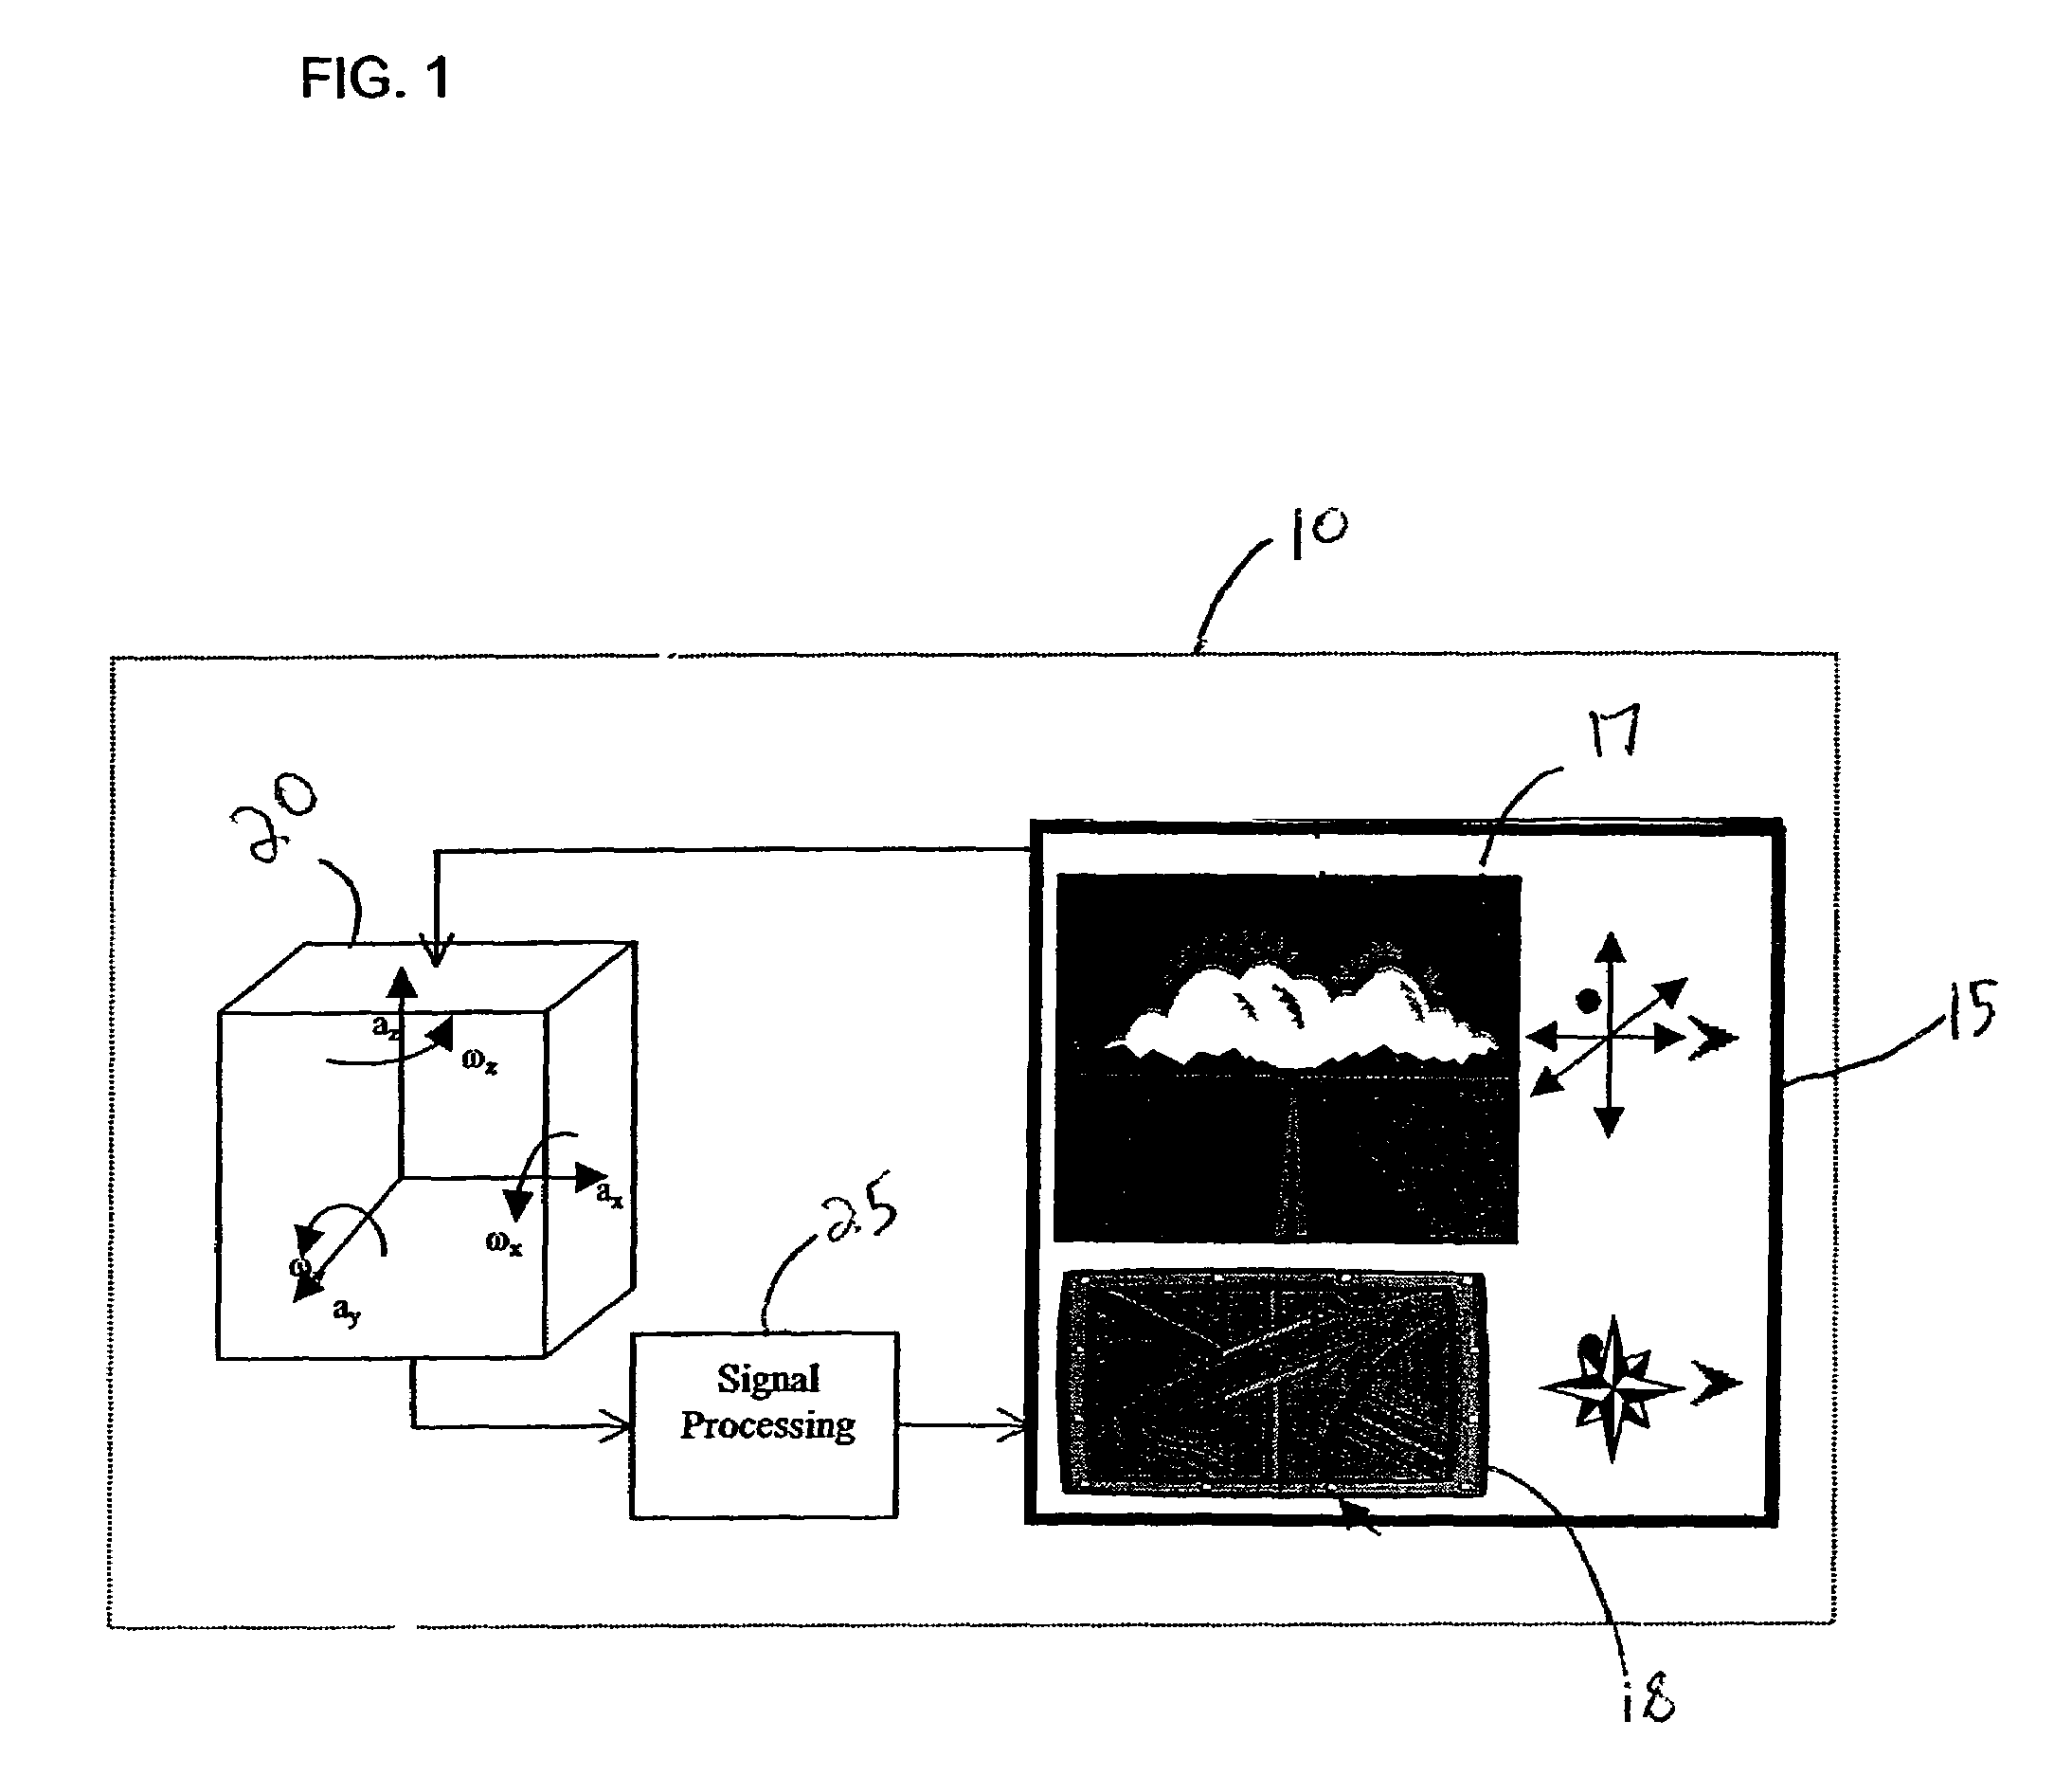 Orientation and navigation for a mobile device using inertial sensors